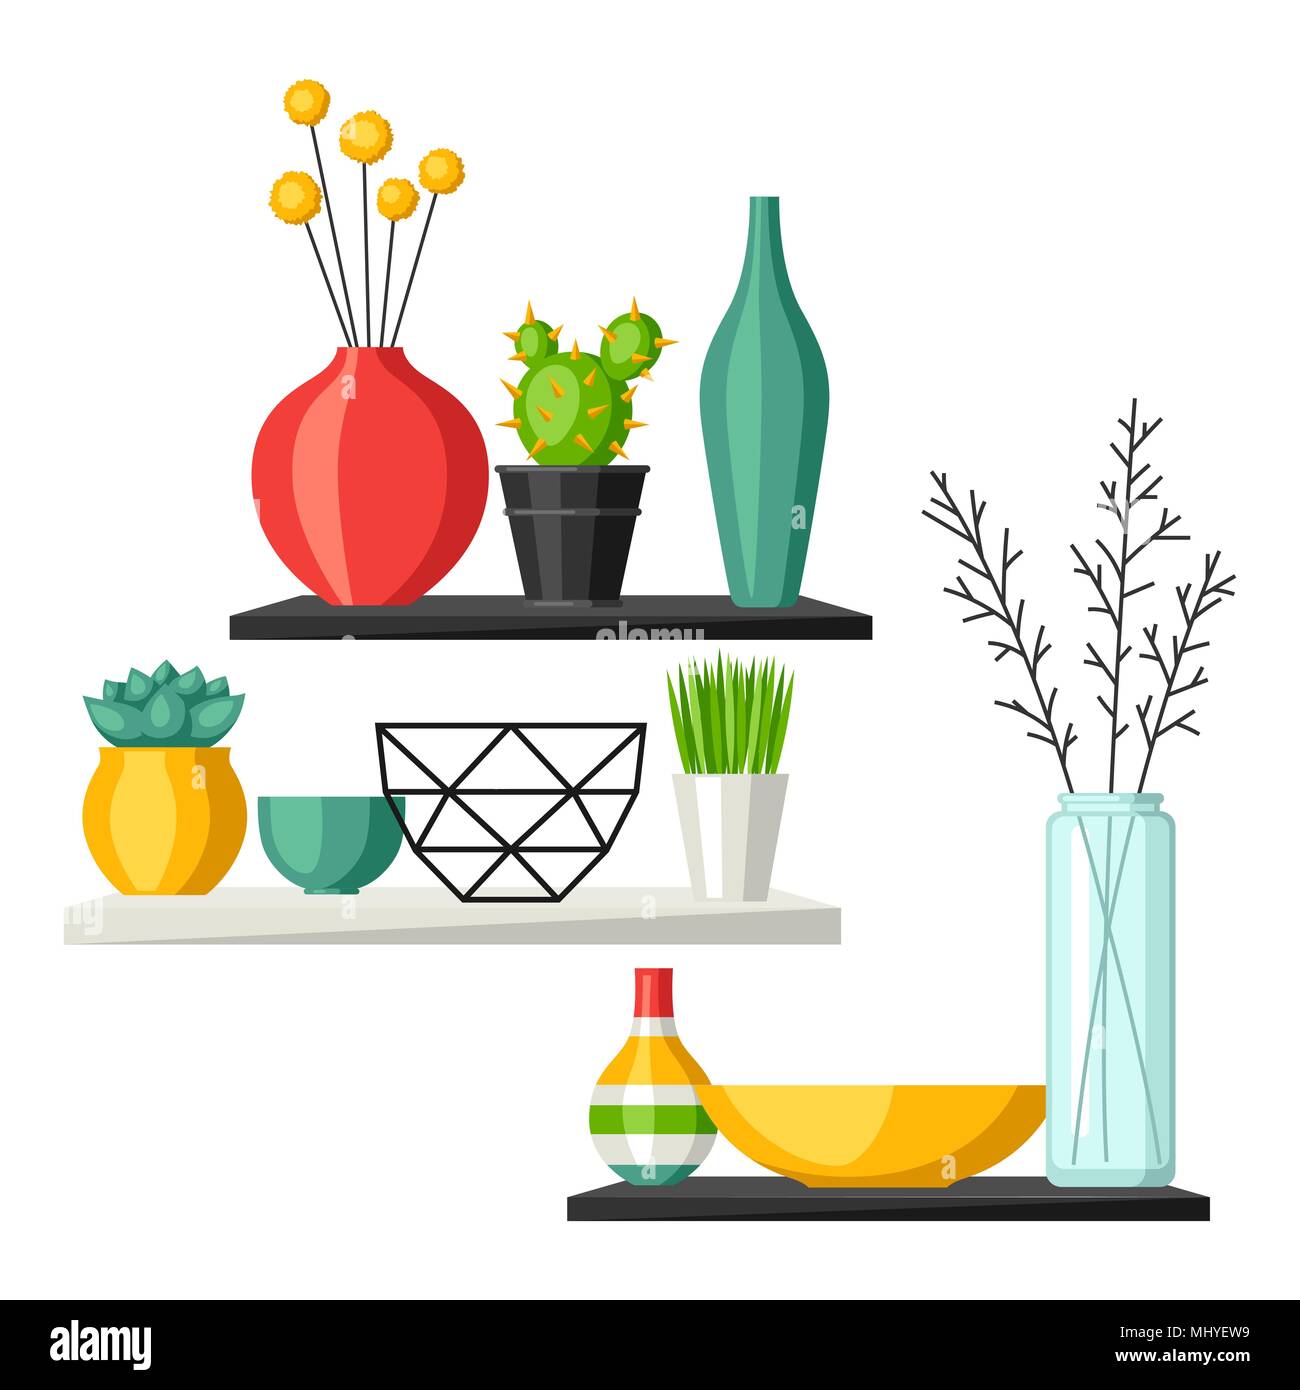 Home decoration vases flower pots, succulents and cacti. Interior illustration Stock Vector